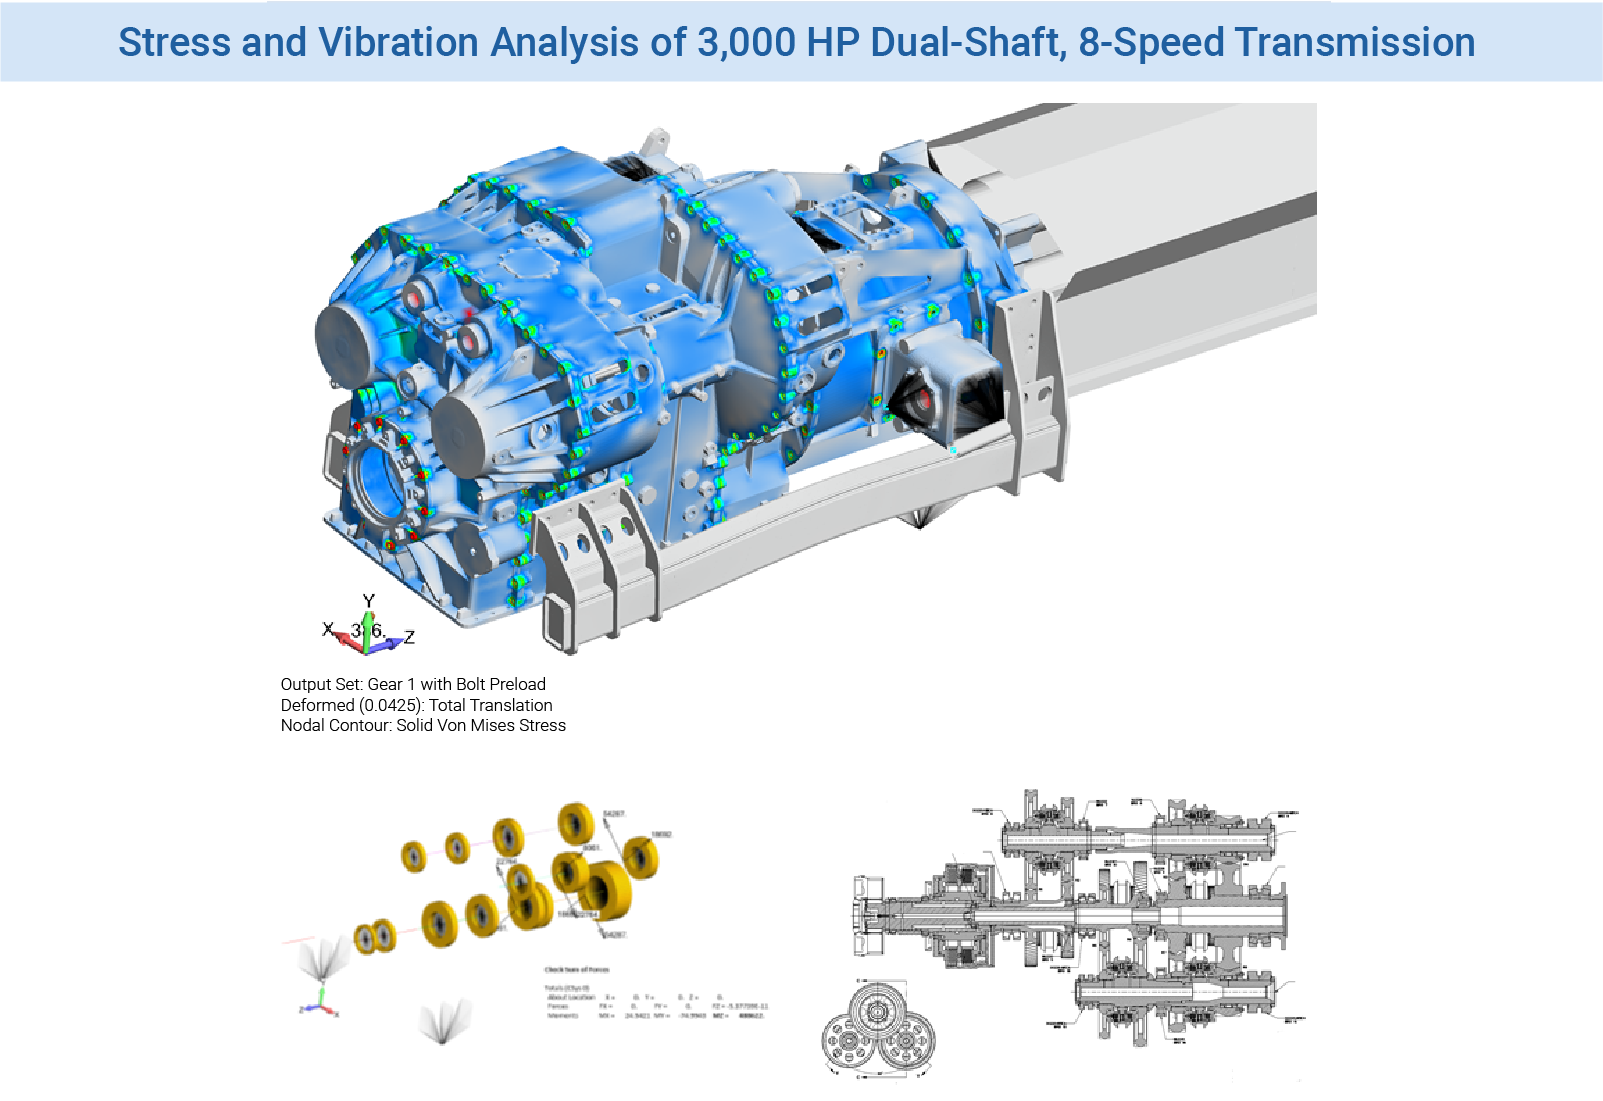 Stress and Vibration Analysis of 3000 HP Dual-Shaft 8-Speed Transmission for Pumping of Heavy Fluid - Finite Element Analysis Consultants, Portland, Oregon